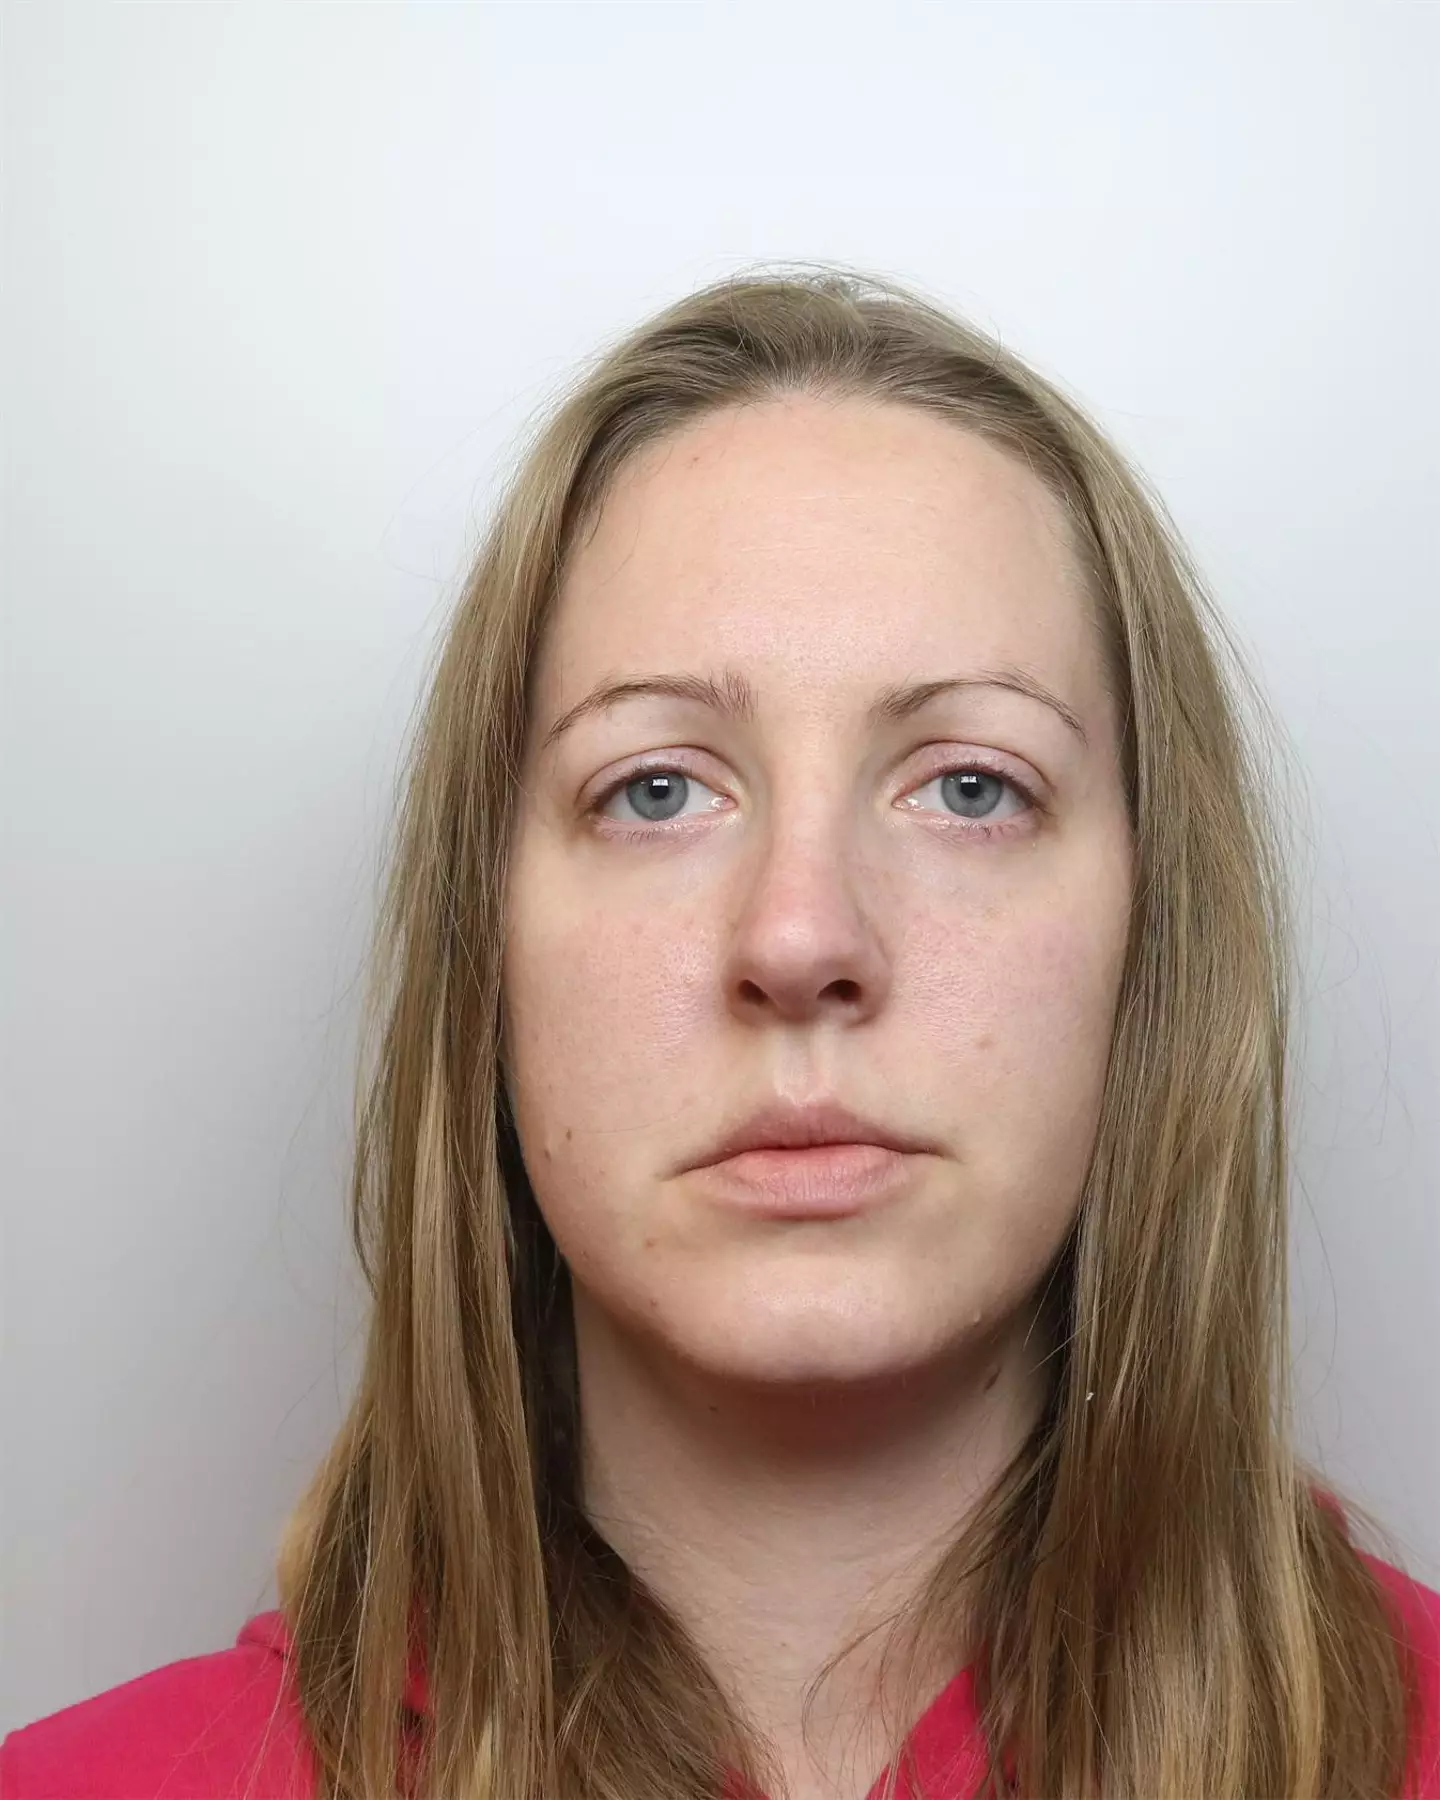 Lucy Letby was found guilty of the murder of seven babies and attempting to murder six more.